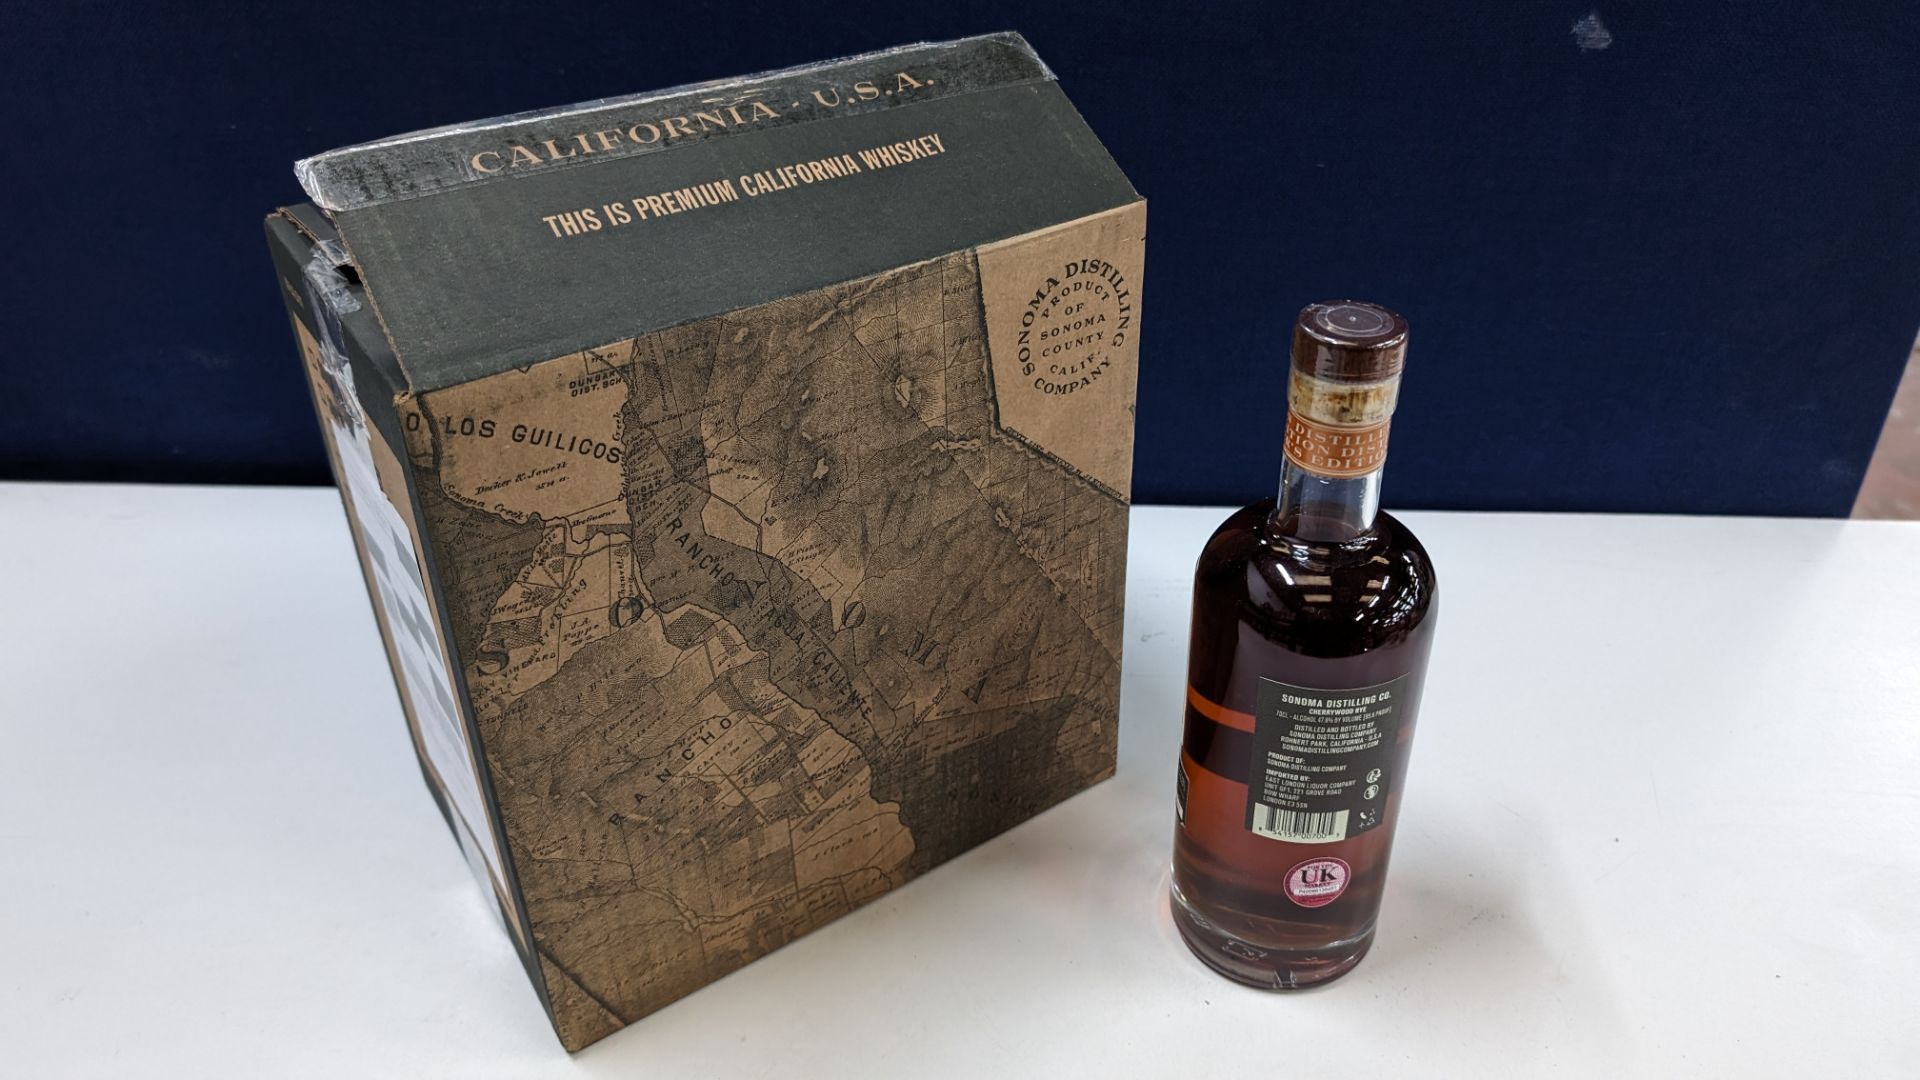 6 off 700ml bottles of Sonoma Cherrywood Rye Whiskey. In Sonoma branded box which includes bottling - Image 7 of 7